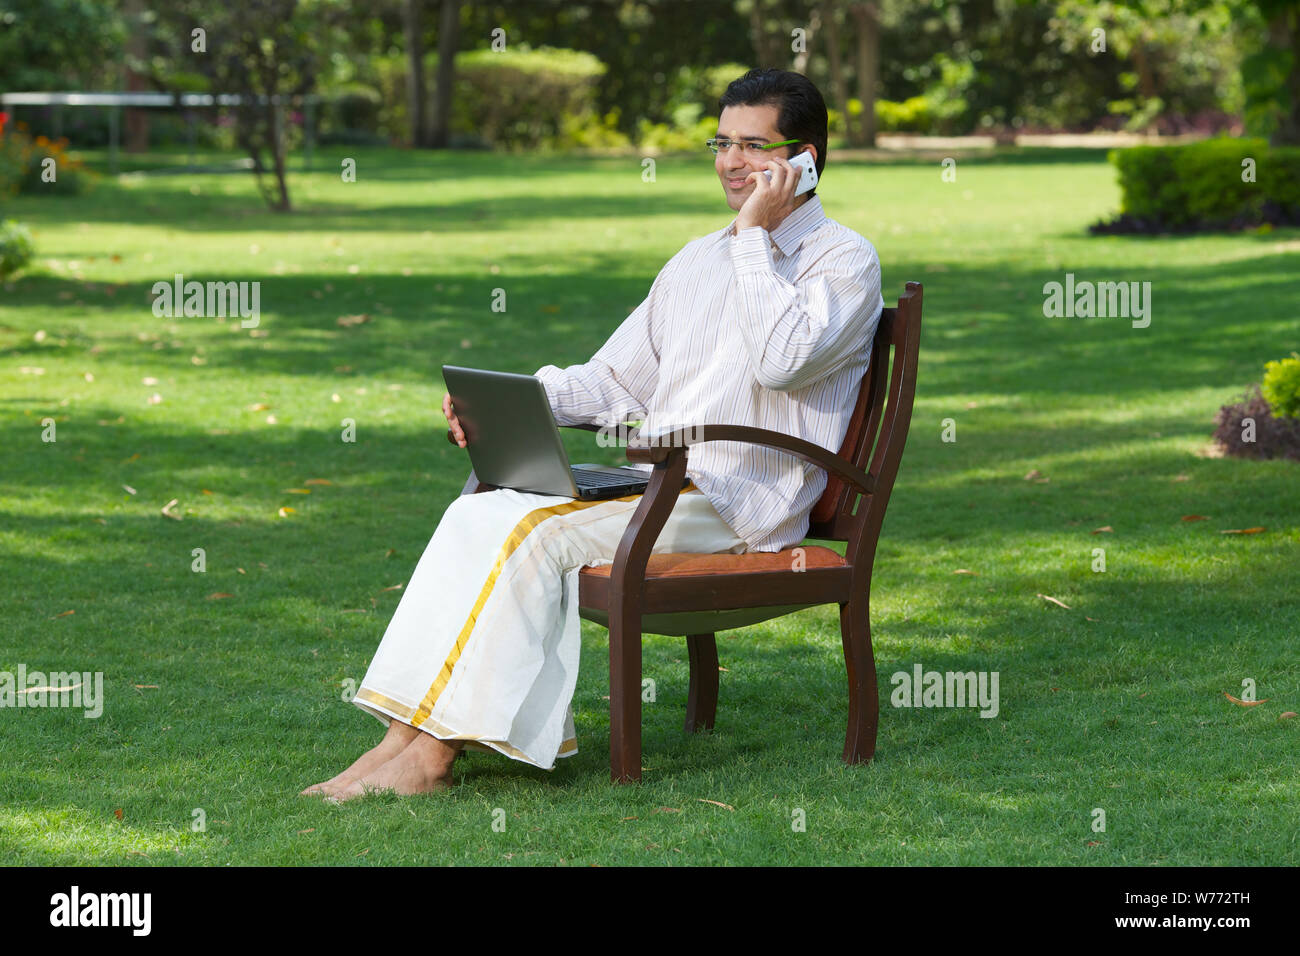 South Indian man talking on mobile phone and using laptop Stock Photo